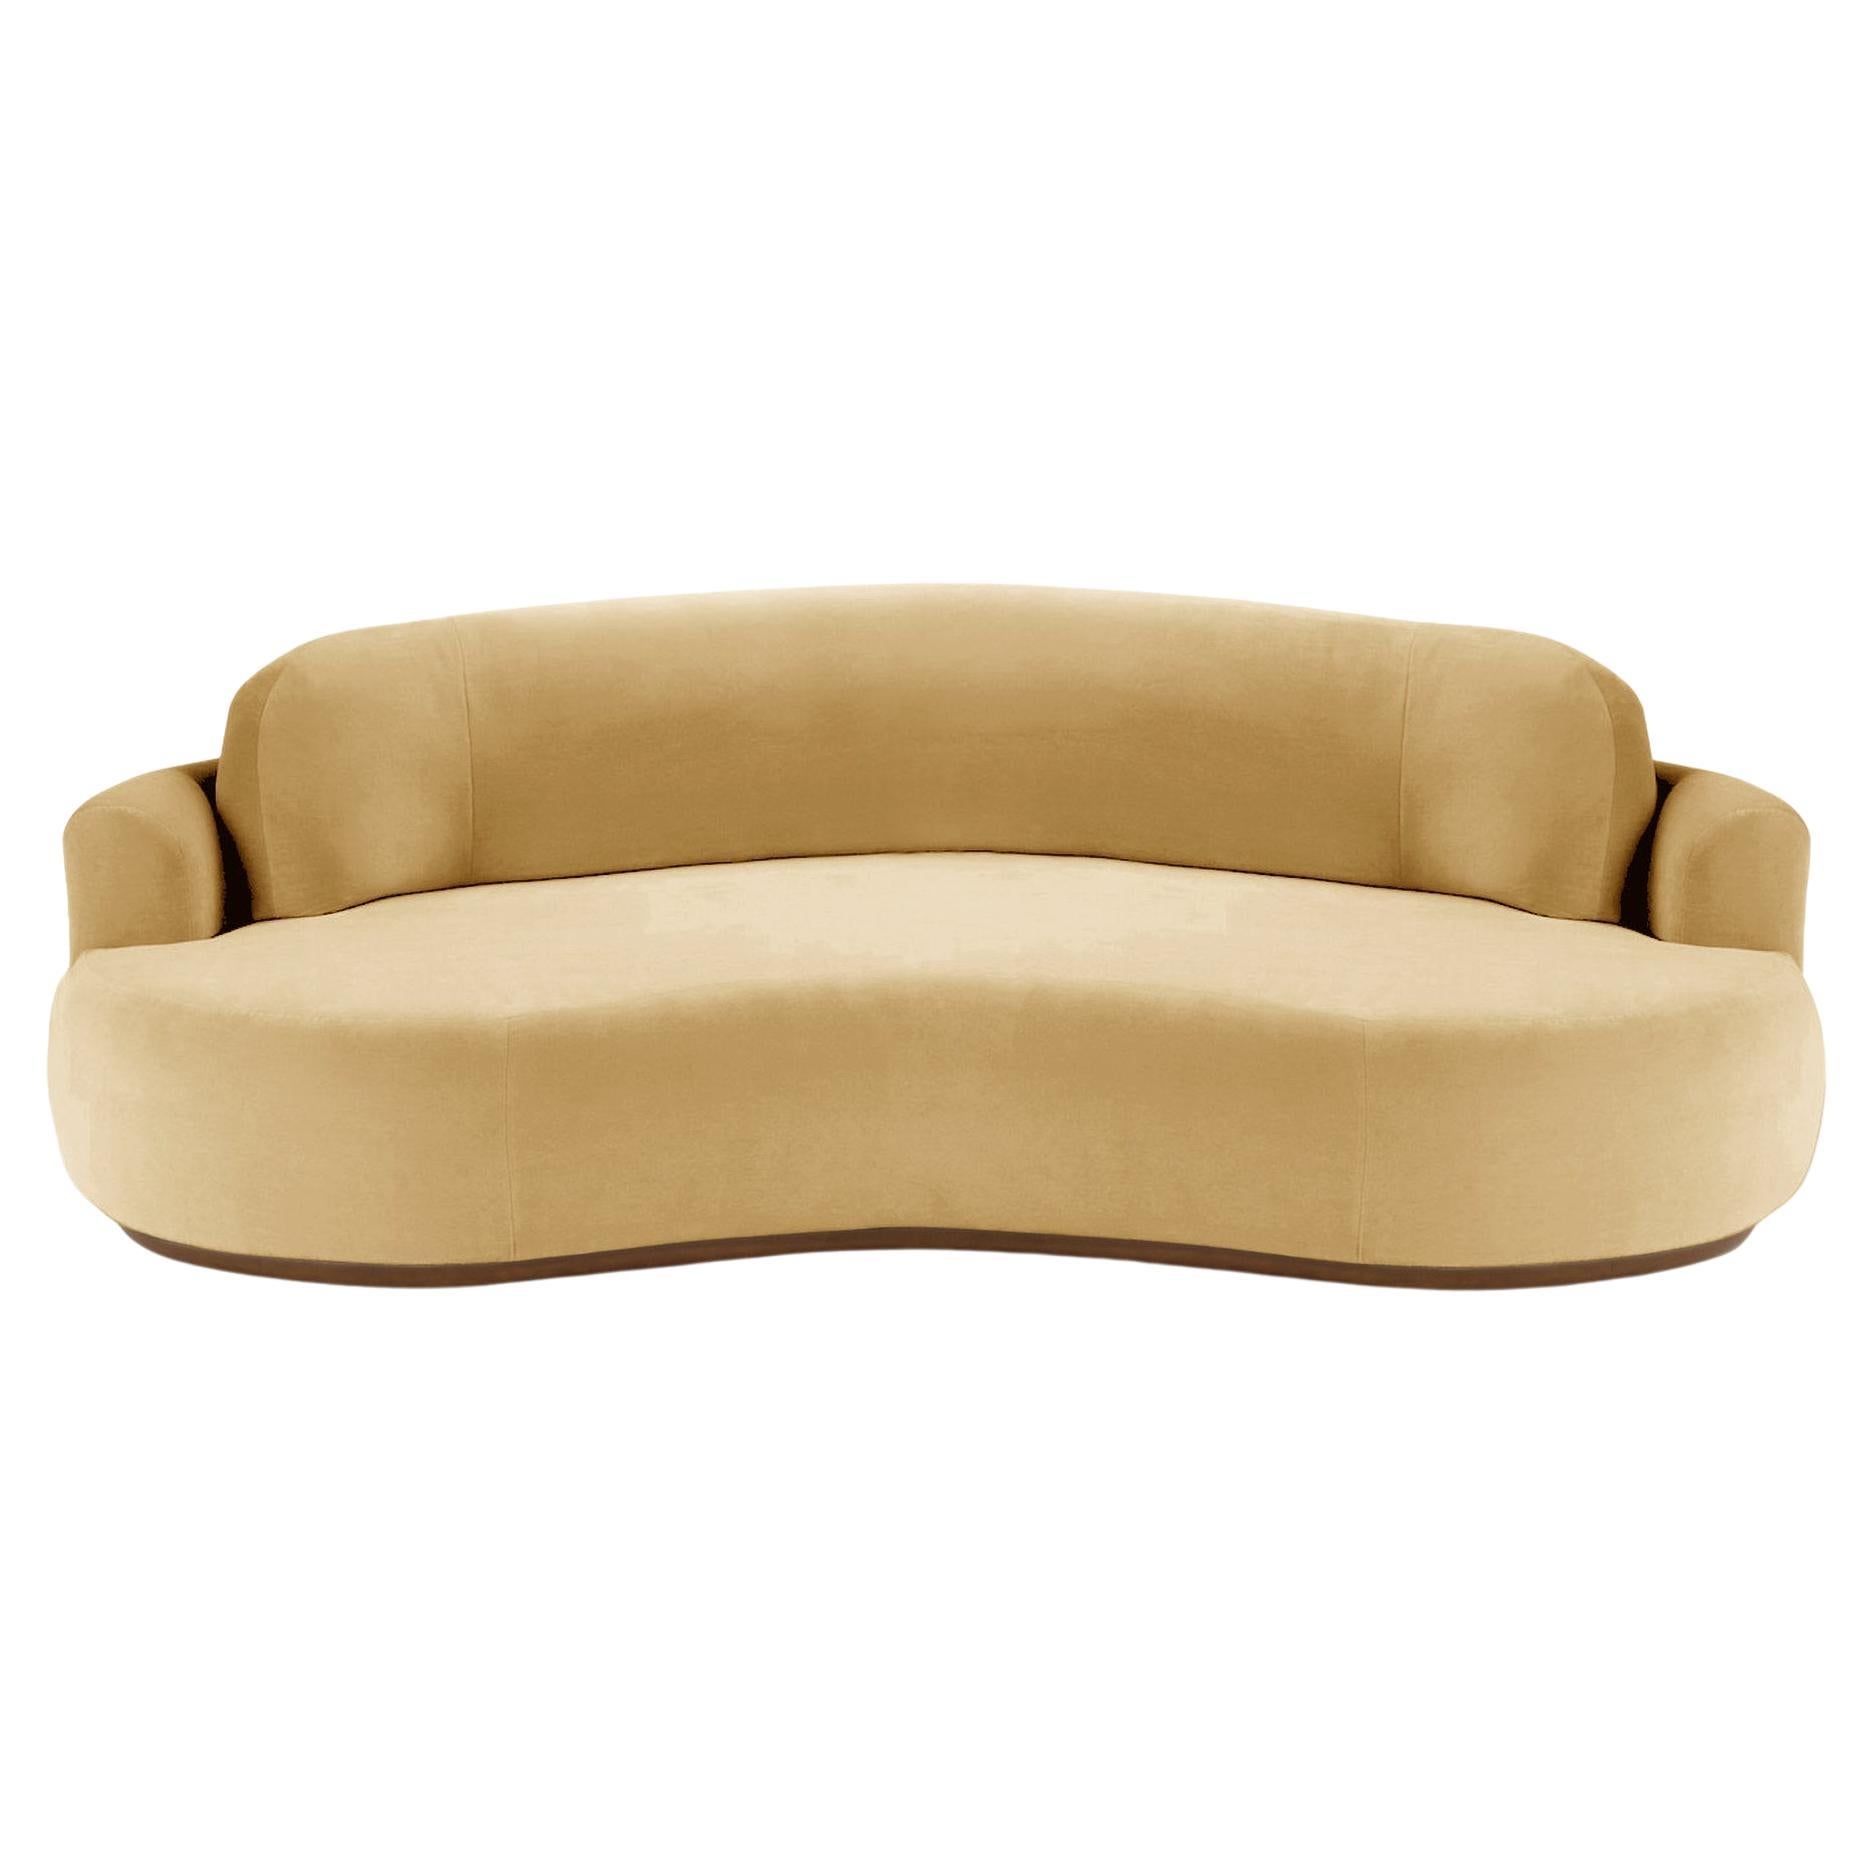 Naked Curved Sofa, Large with Beech Ash-056-1 and Vigo Plantain